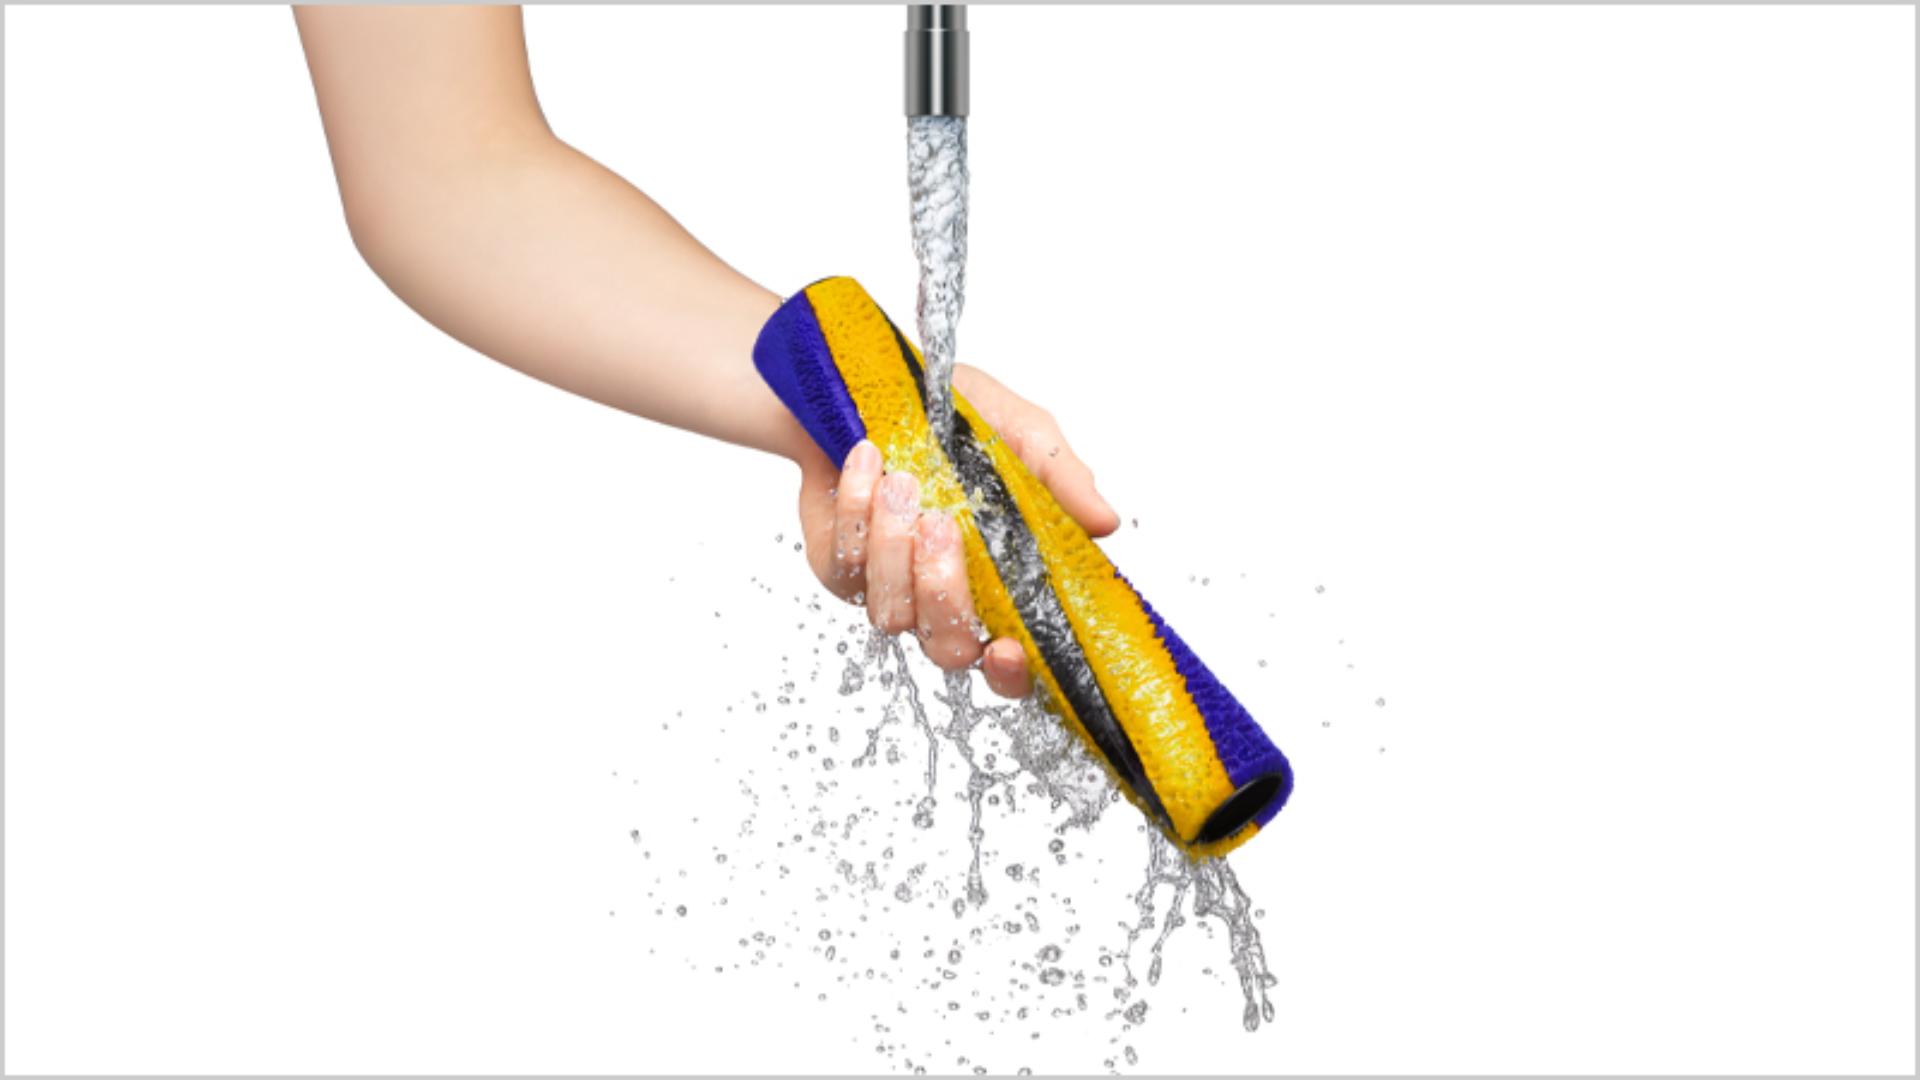 Dyson removable parts being washed in water